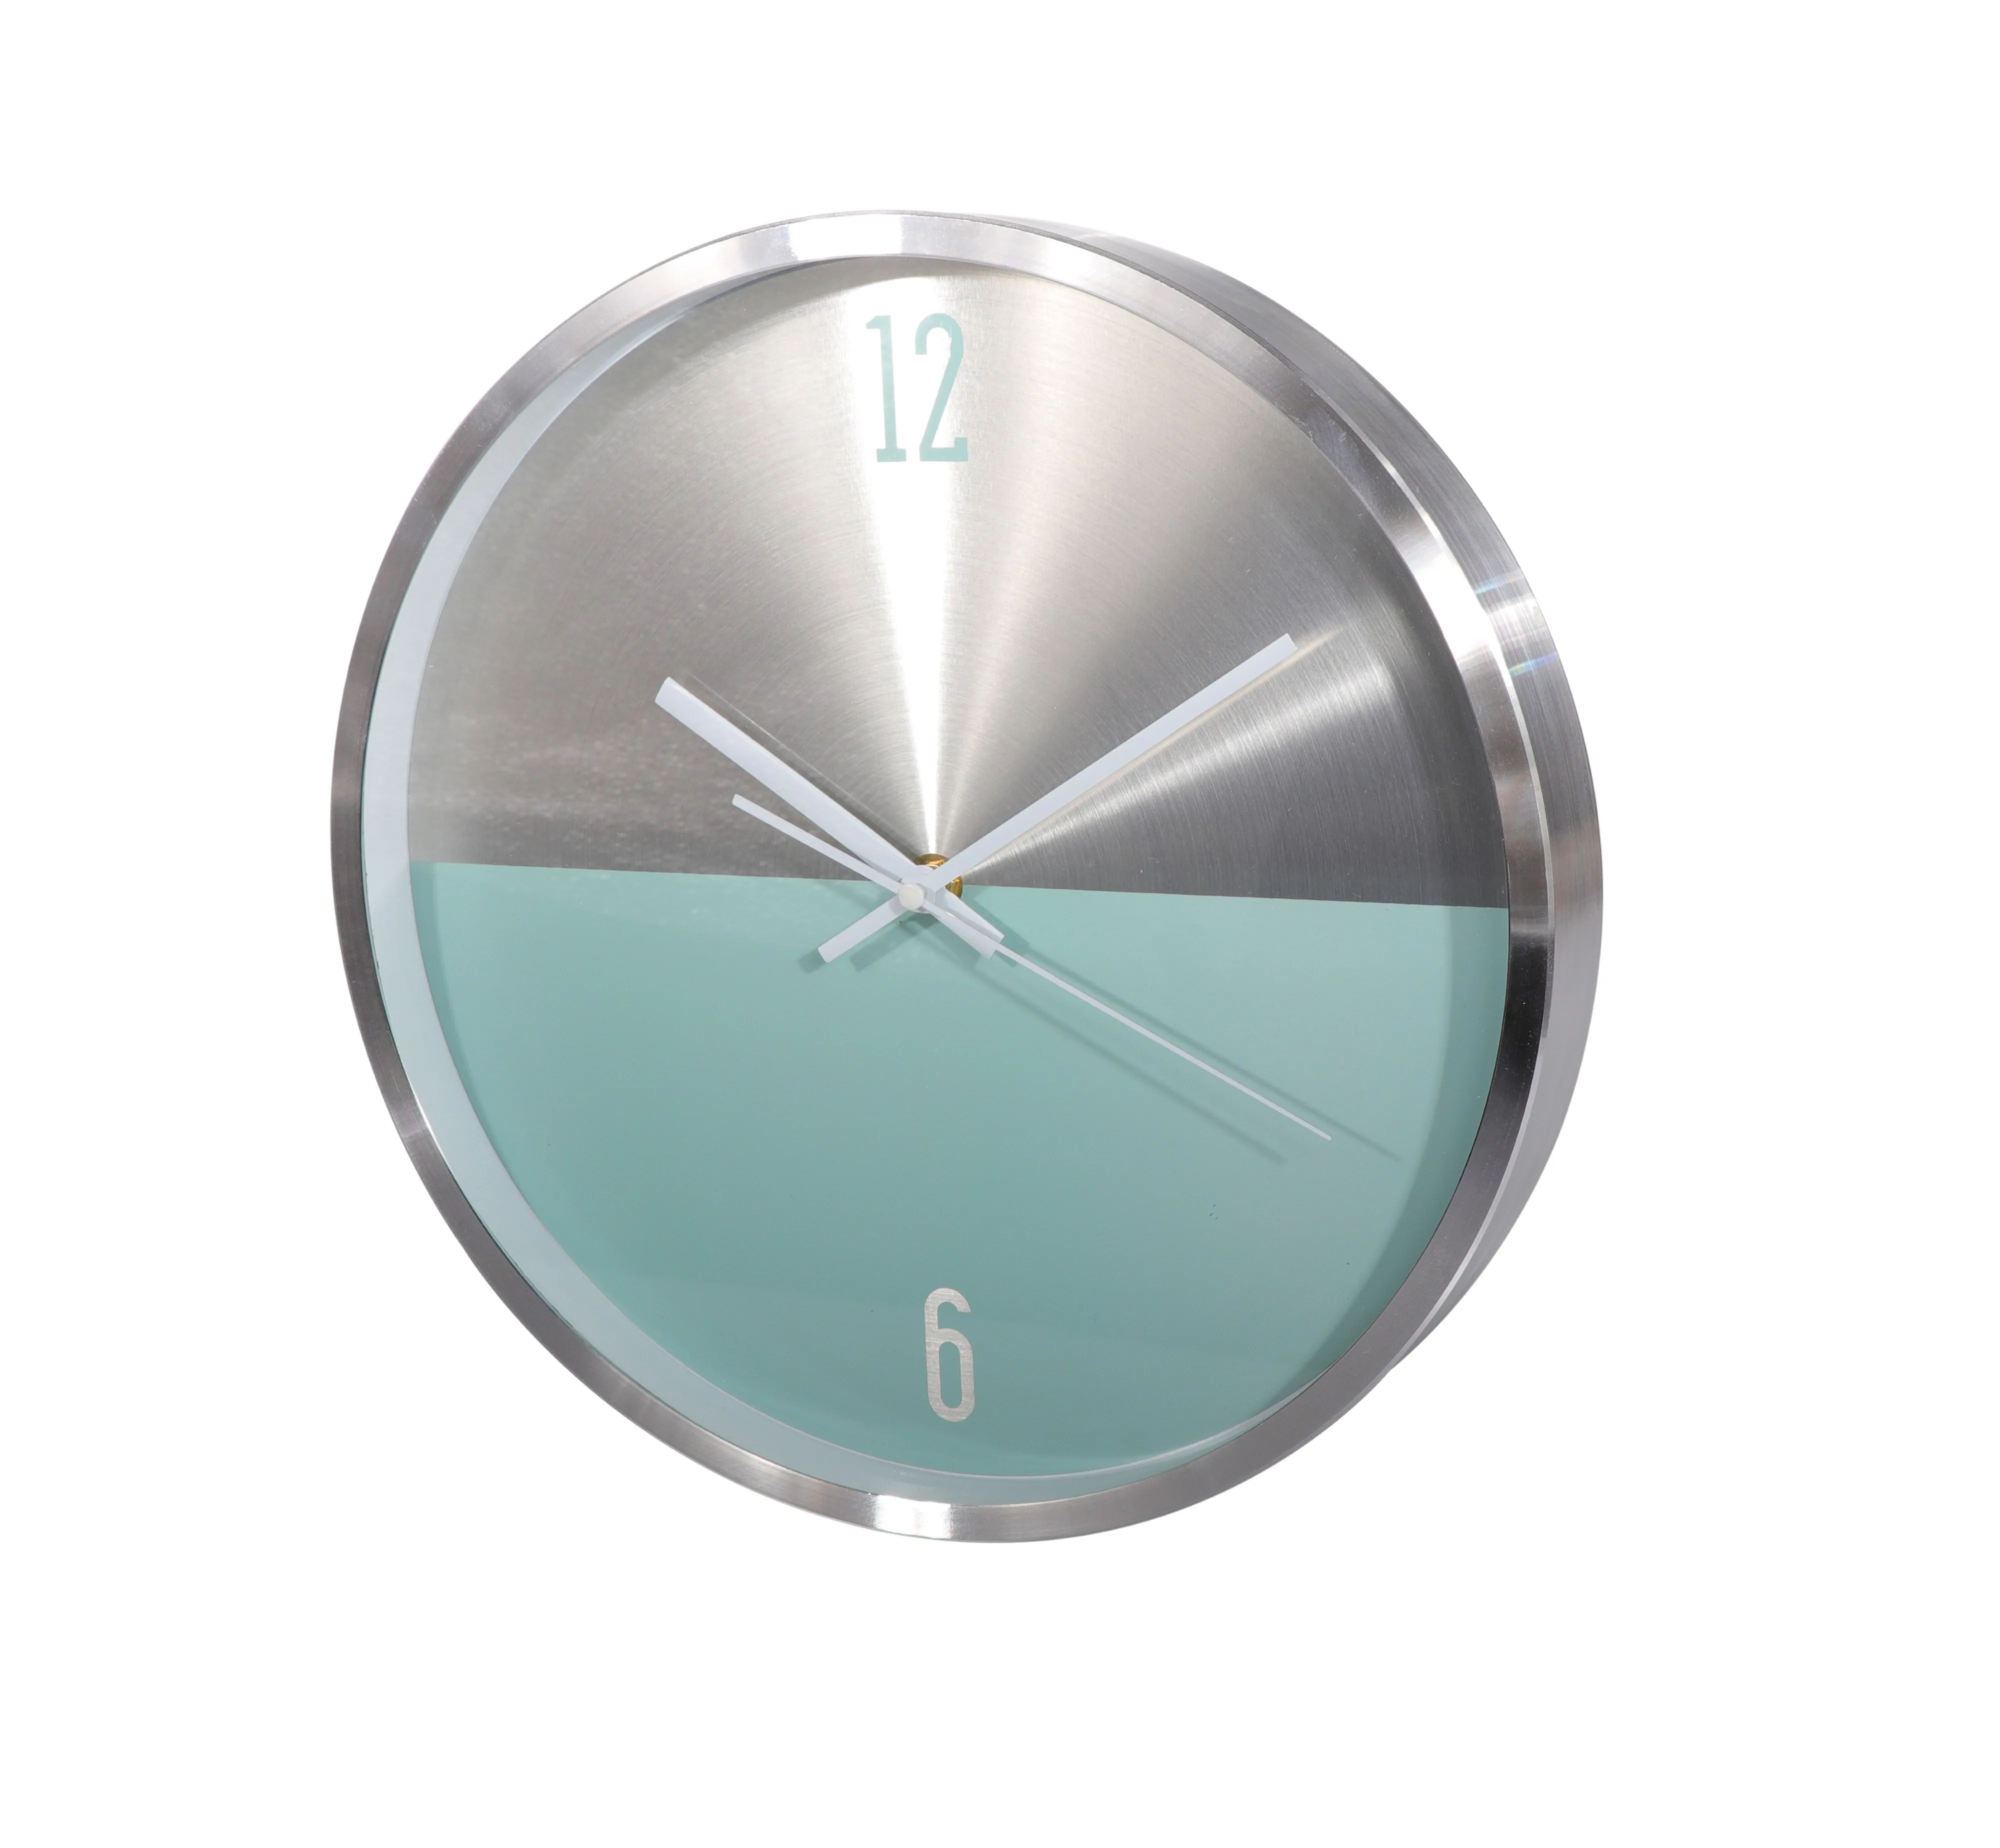 Royalford  RF9277 Wall Clock with Aluminium Frame- Silent Sweep Motion, Numeral Clock, Round Decorative Wall Clock for Living Room, Bedroom, Kitchen Aluminium Frame Silver & Blue